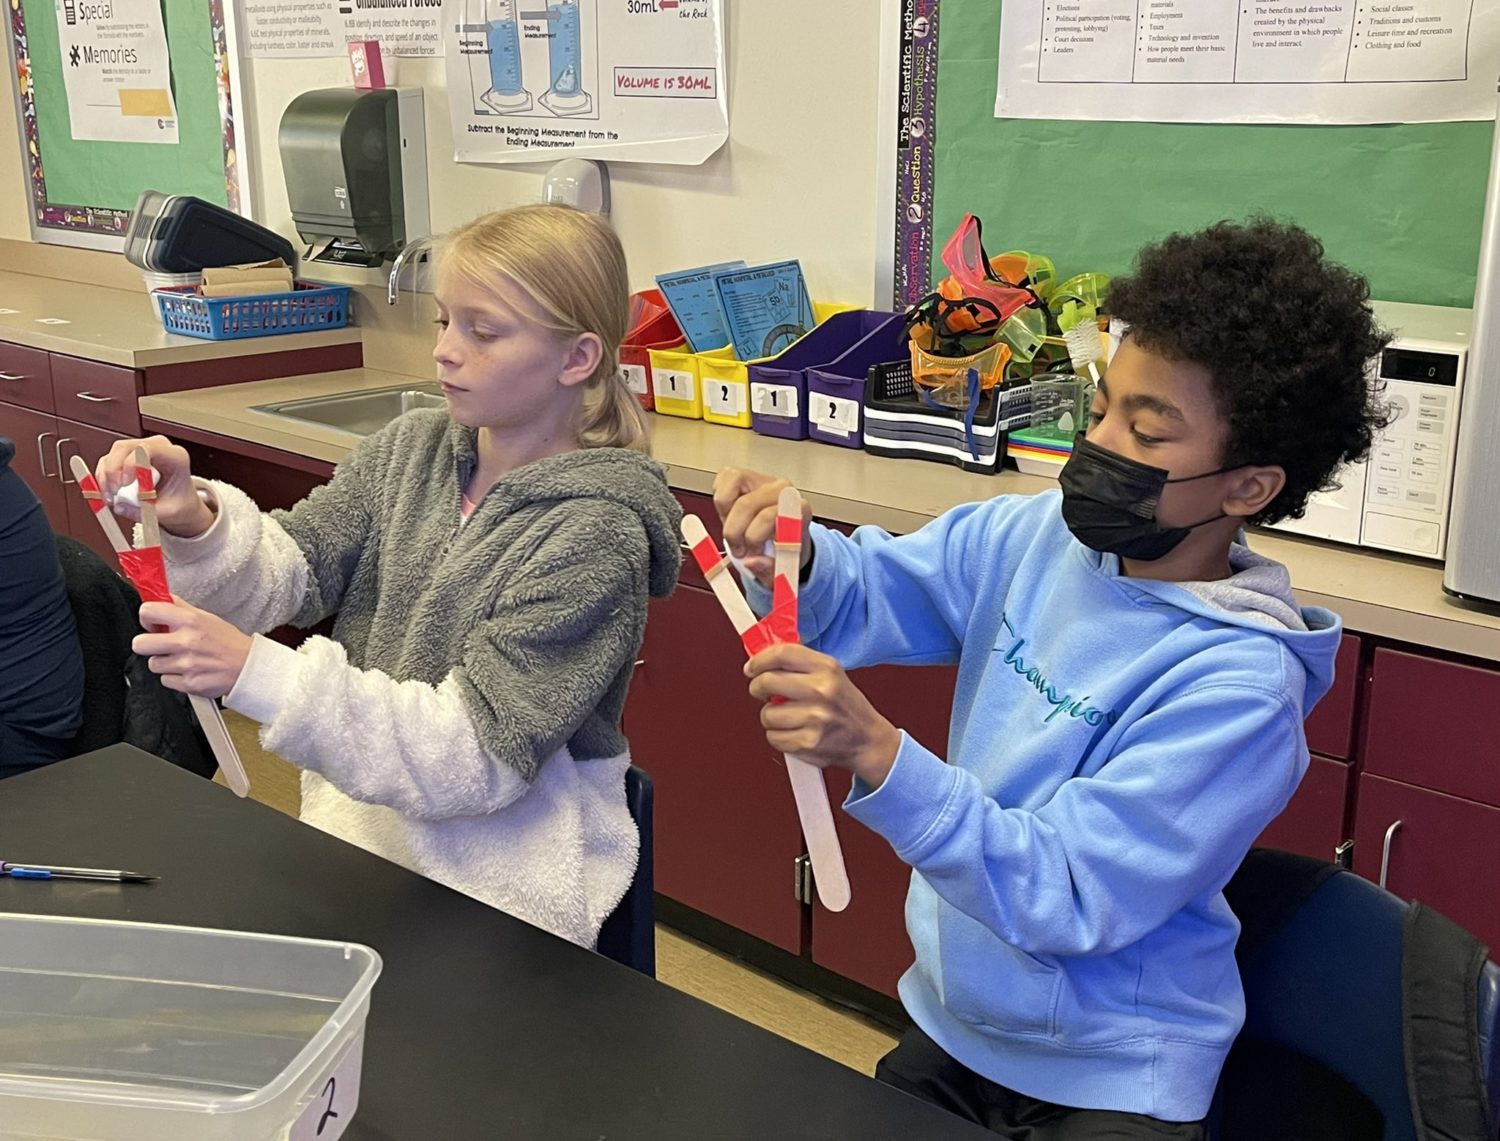 Two students work together on a lab.